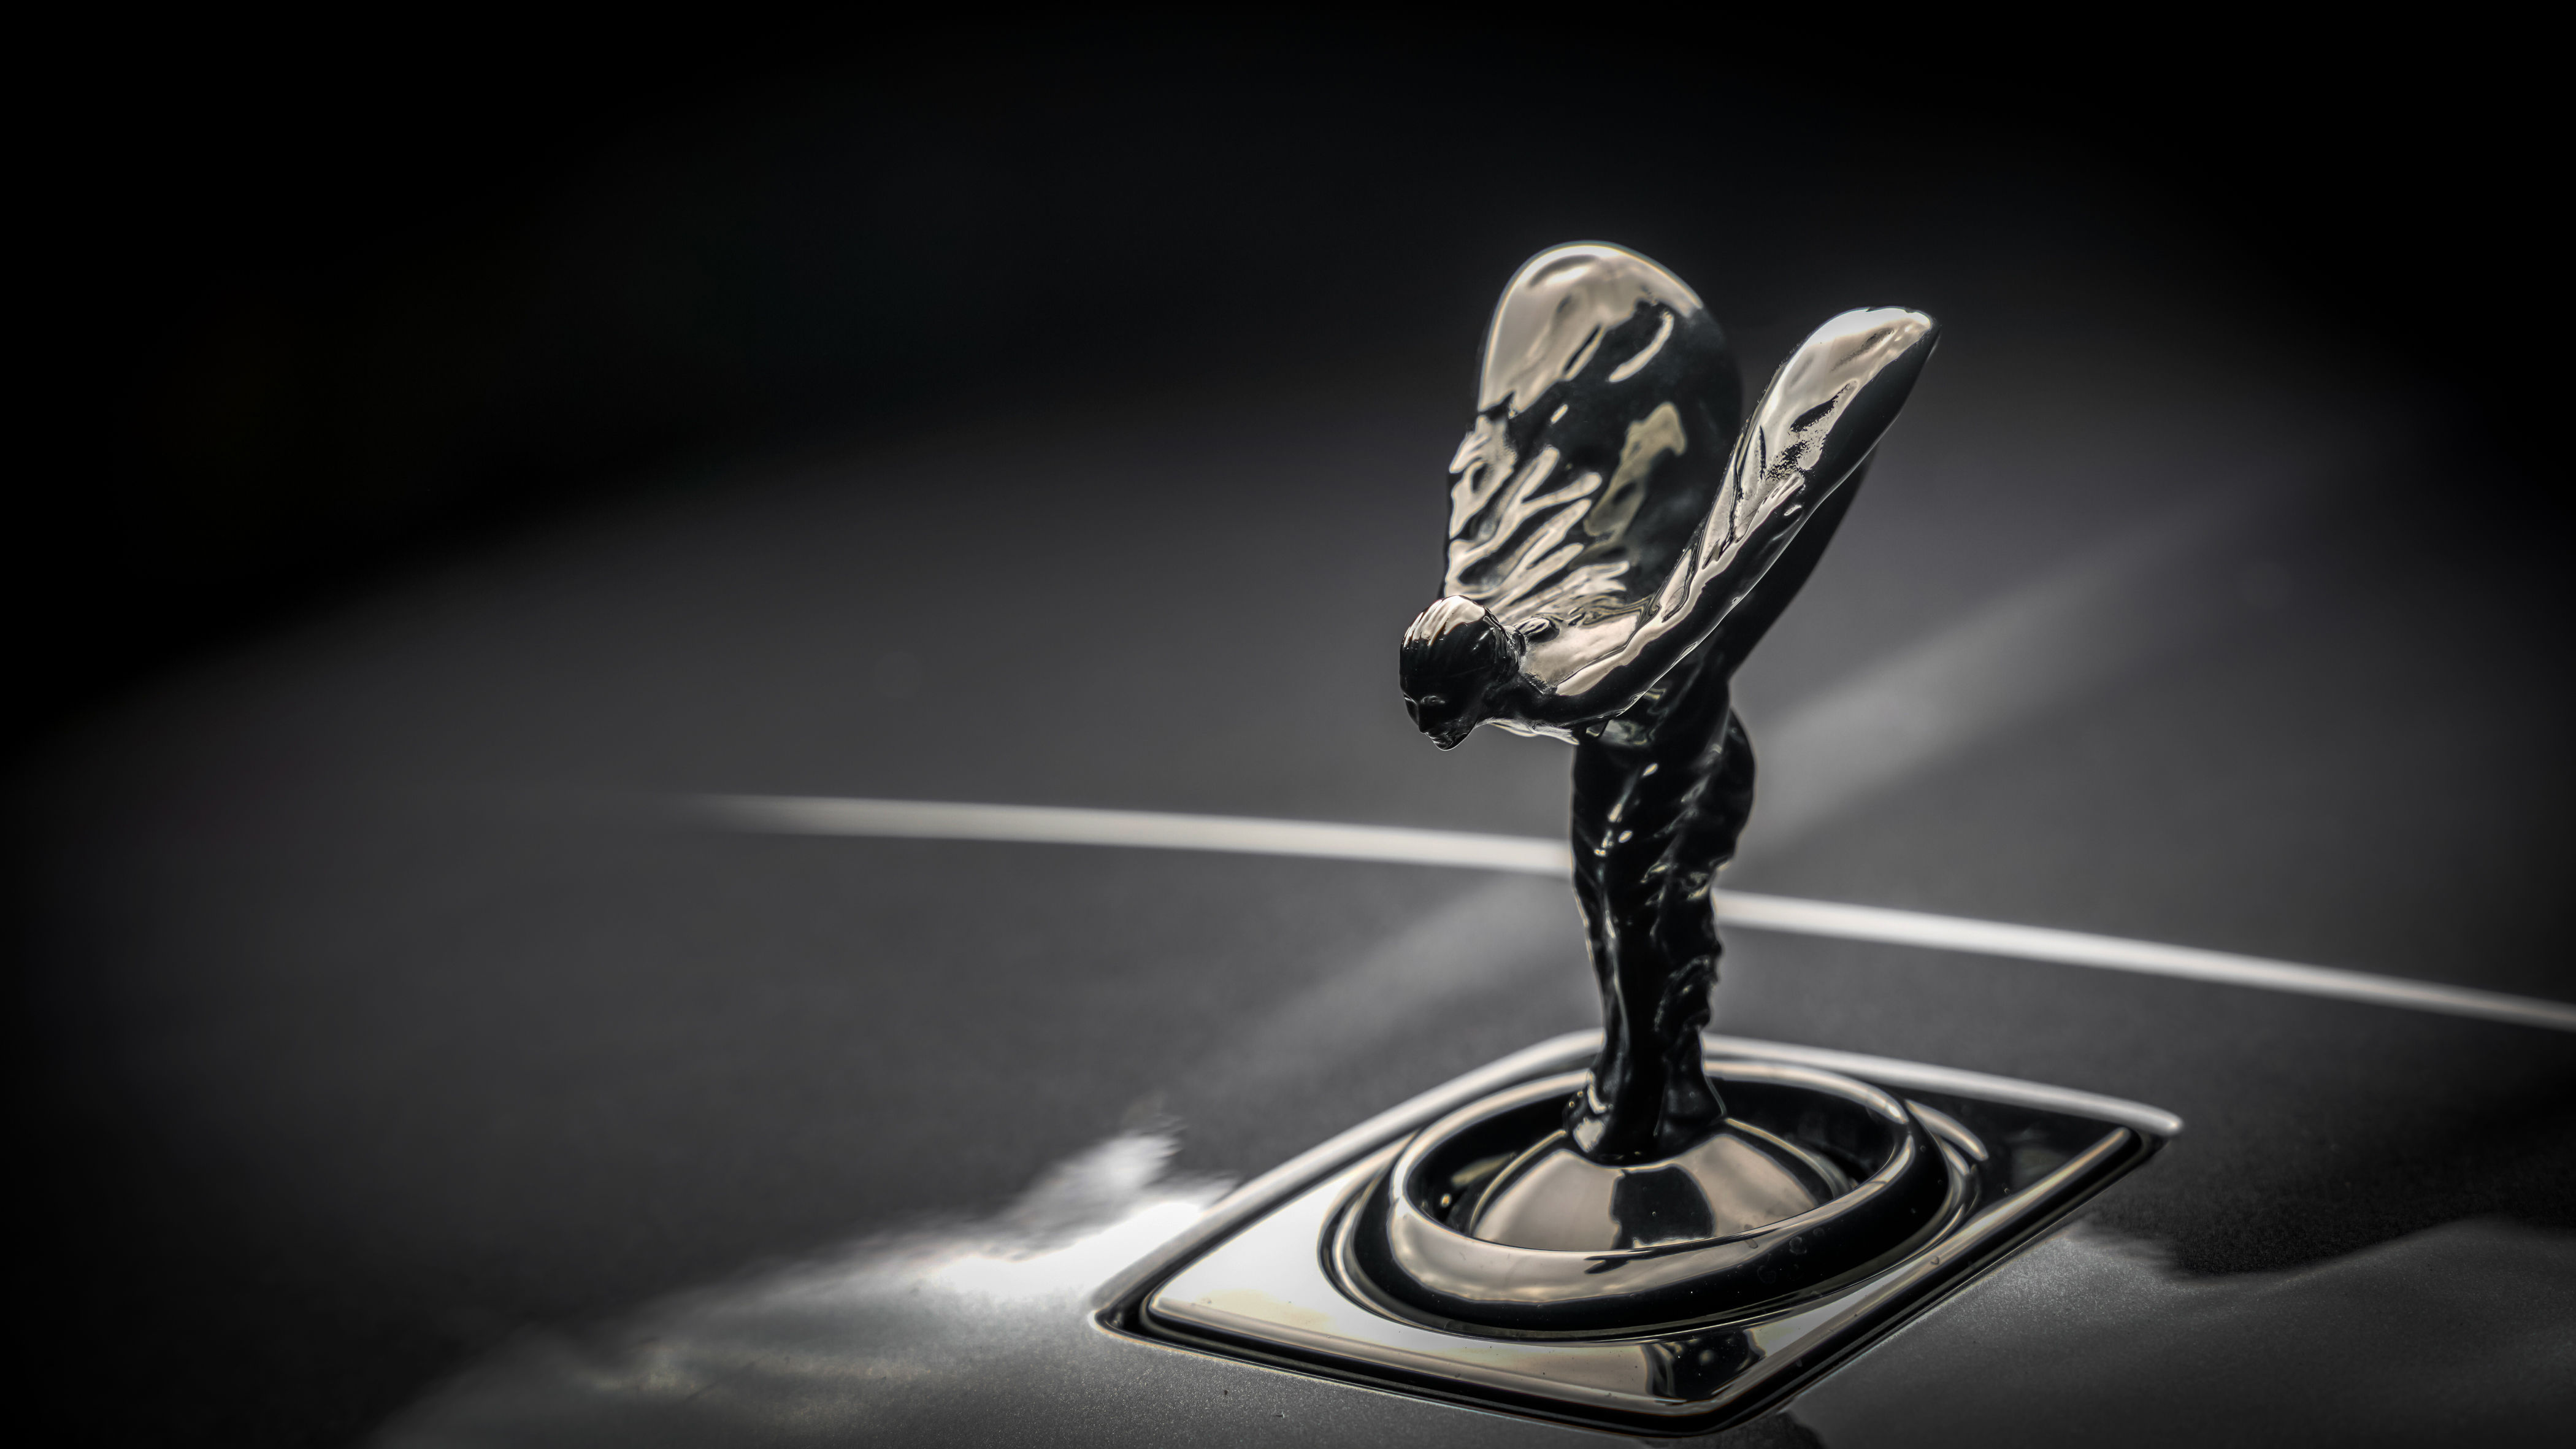 The Rolls-Royce Black Badge - A Brief Introduction